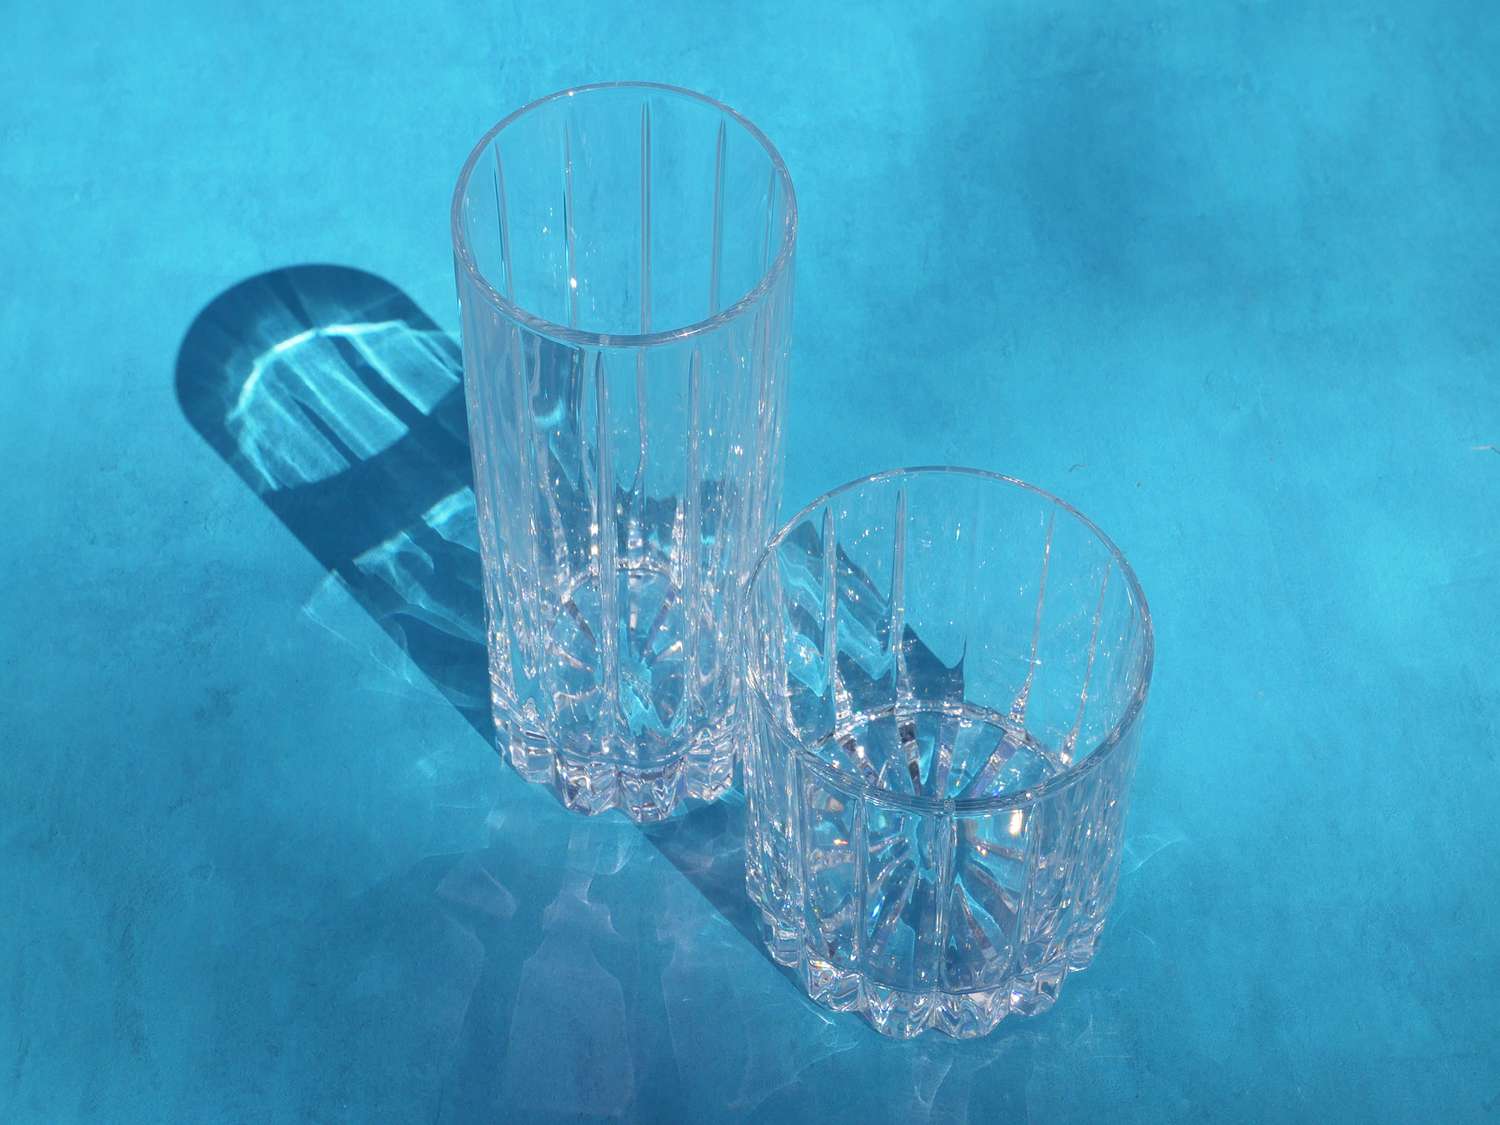 riedel glasses on a blue backdrop